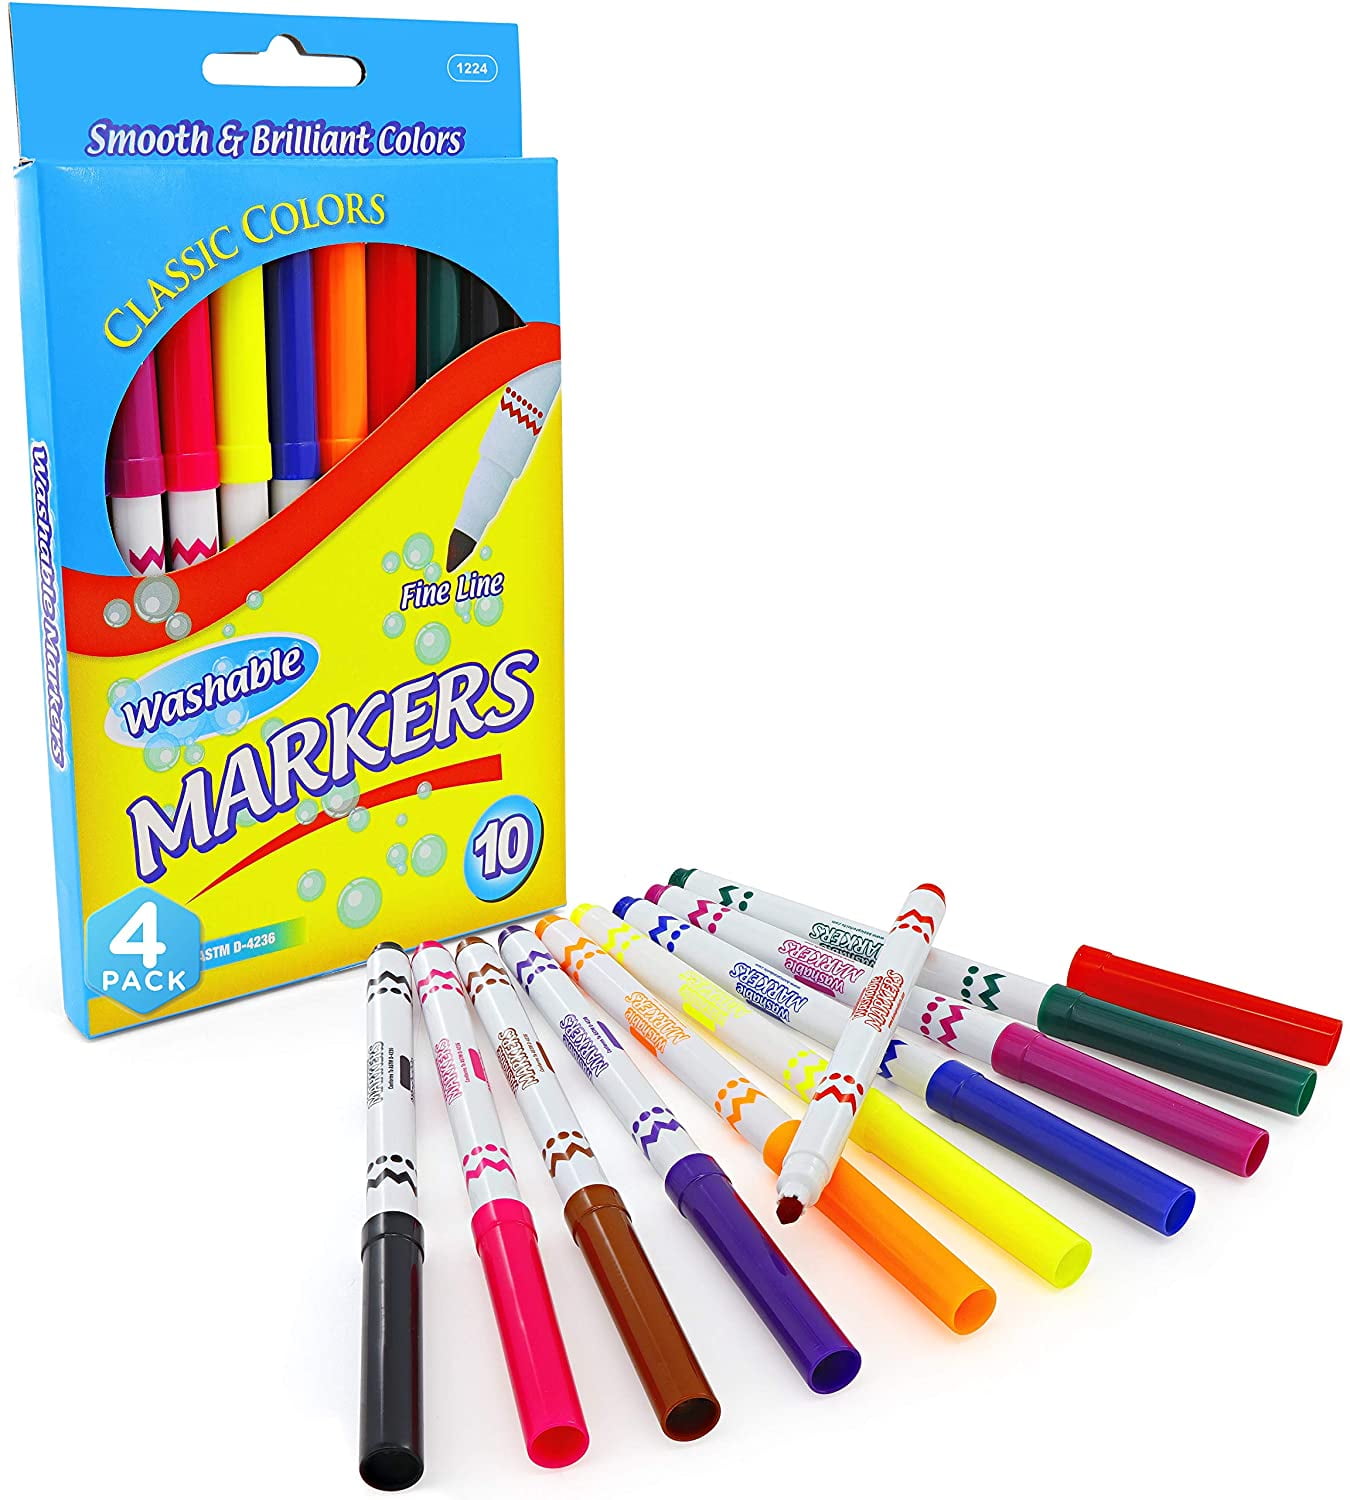 Color Swell Super Tip Washable Bulk Markers Pack 36 Boxes of 8 Vibrant  Colors Each (288 Total Markers) for All Ages, Parties, Classrooms, Home